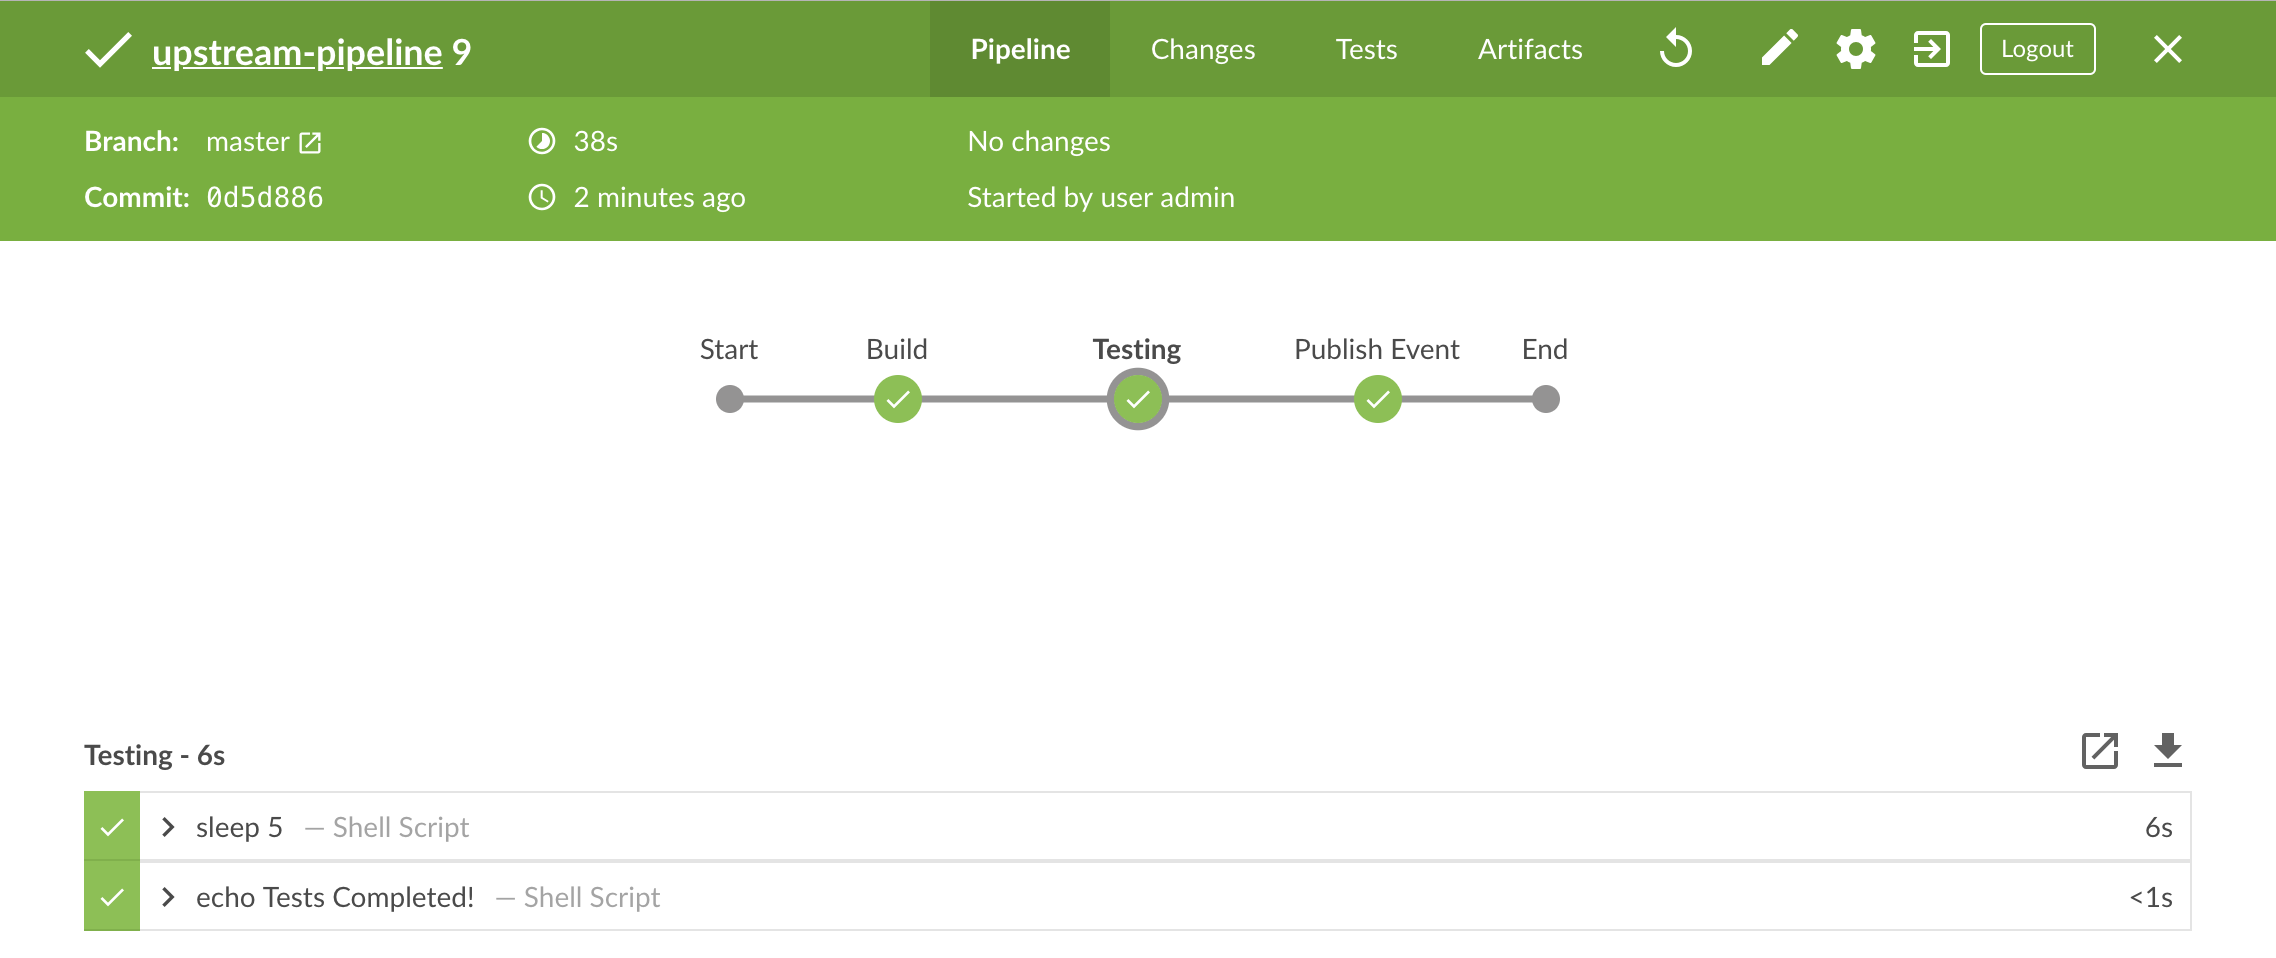 Upstream Pipeline detailed status, test stage clicked upon